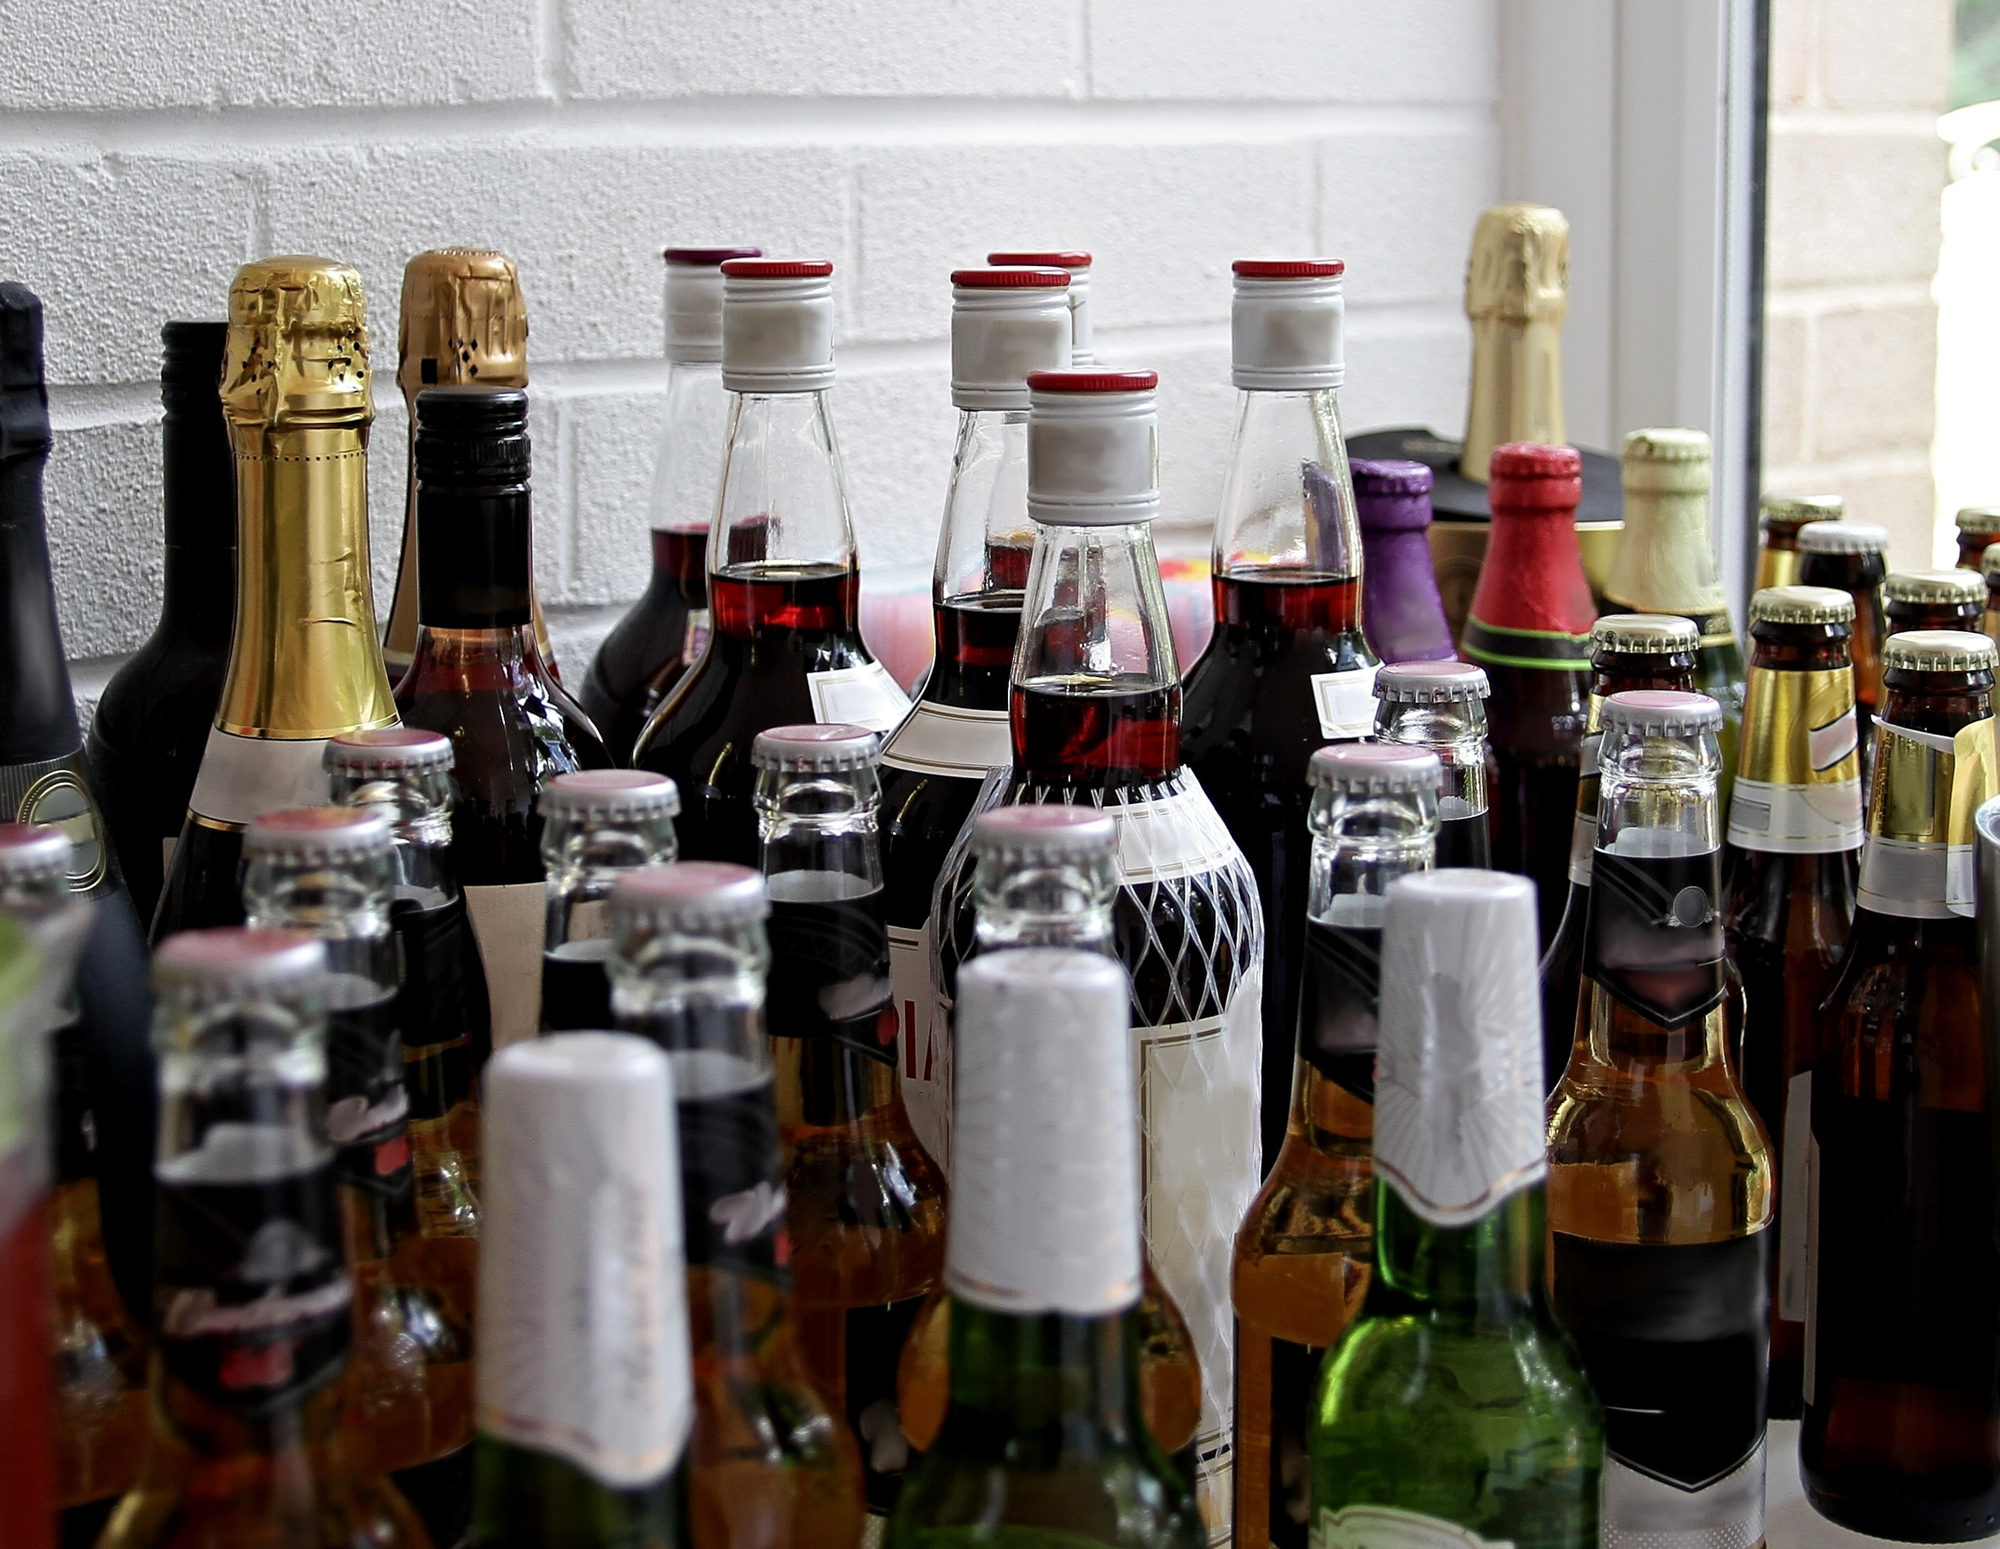 An assortment of beer, champaign, and liquor bottles.